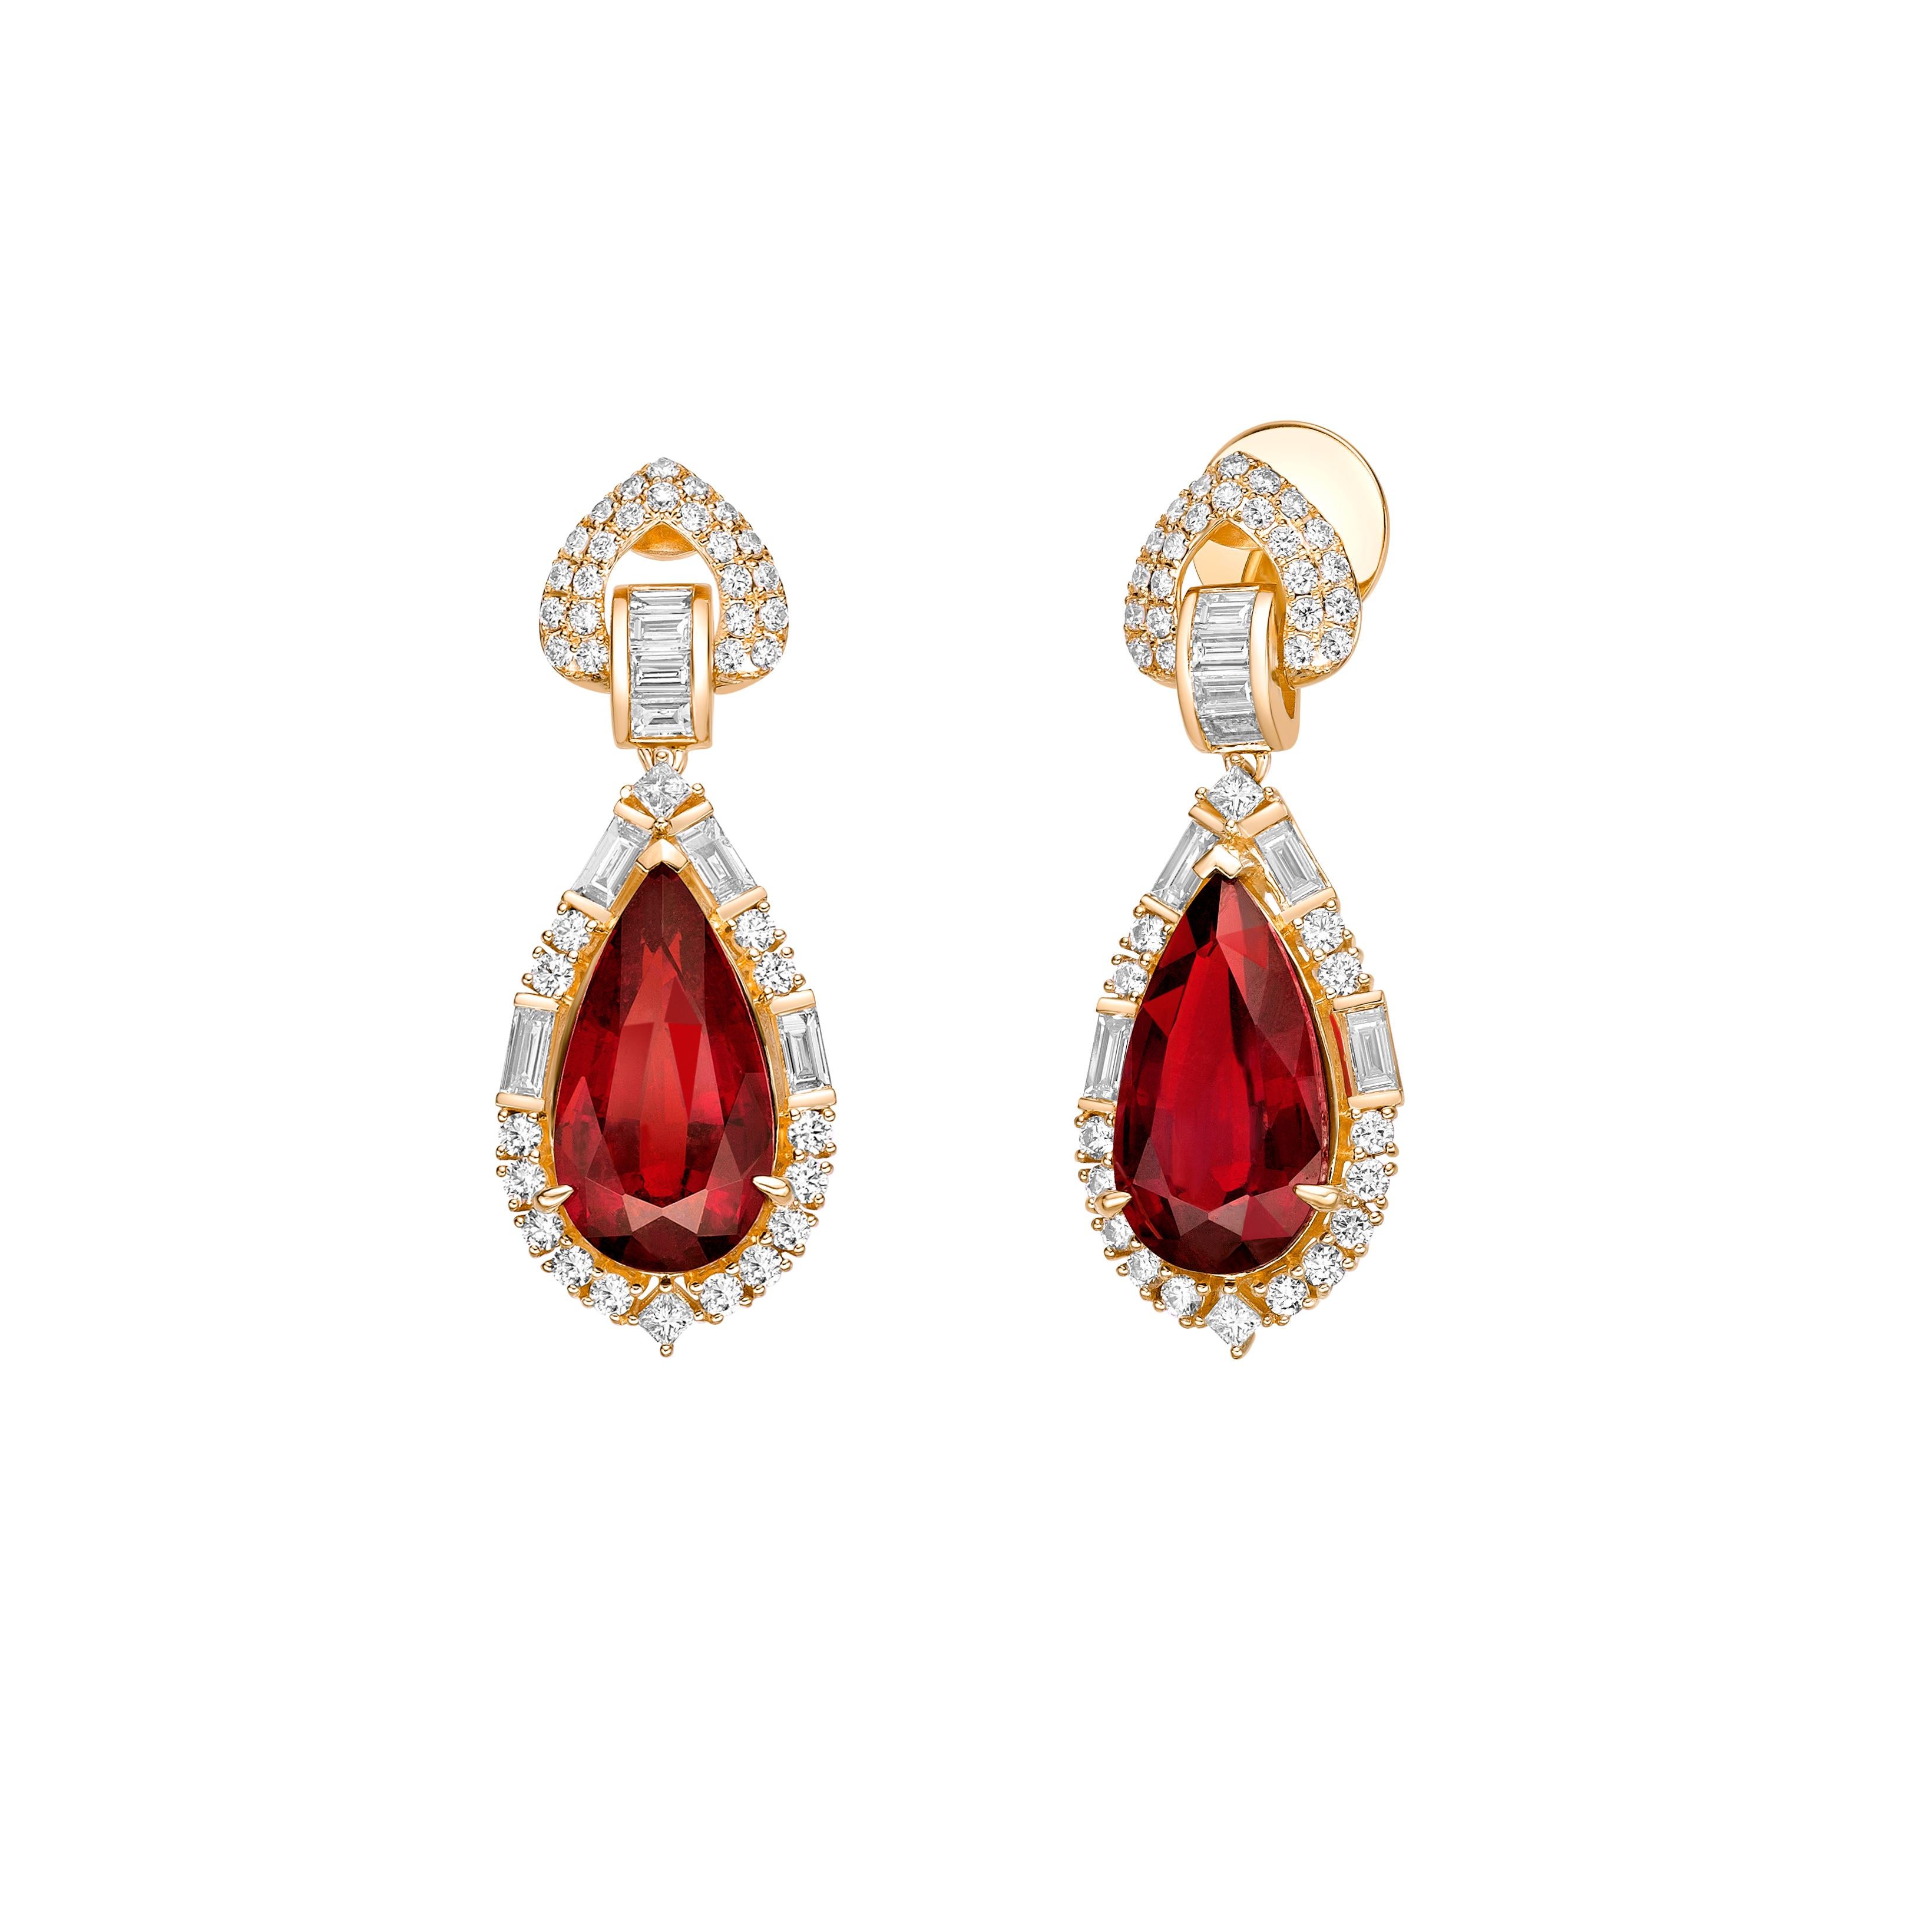 Pear Cut 16.480 Carat Rubellite Drop Earrings in 18Karat Yellow Gold with White Diamond. For Sale